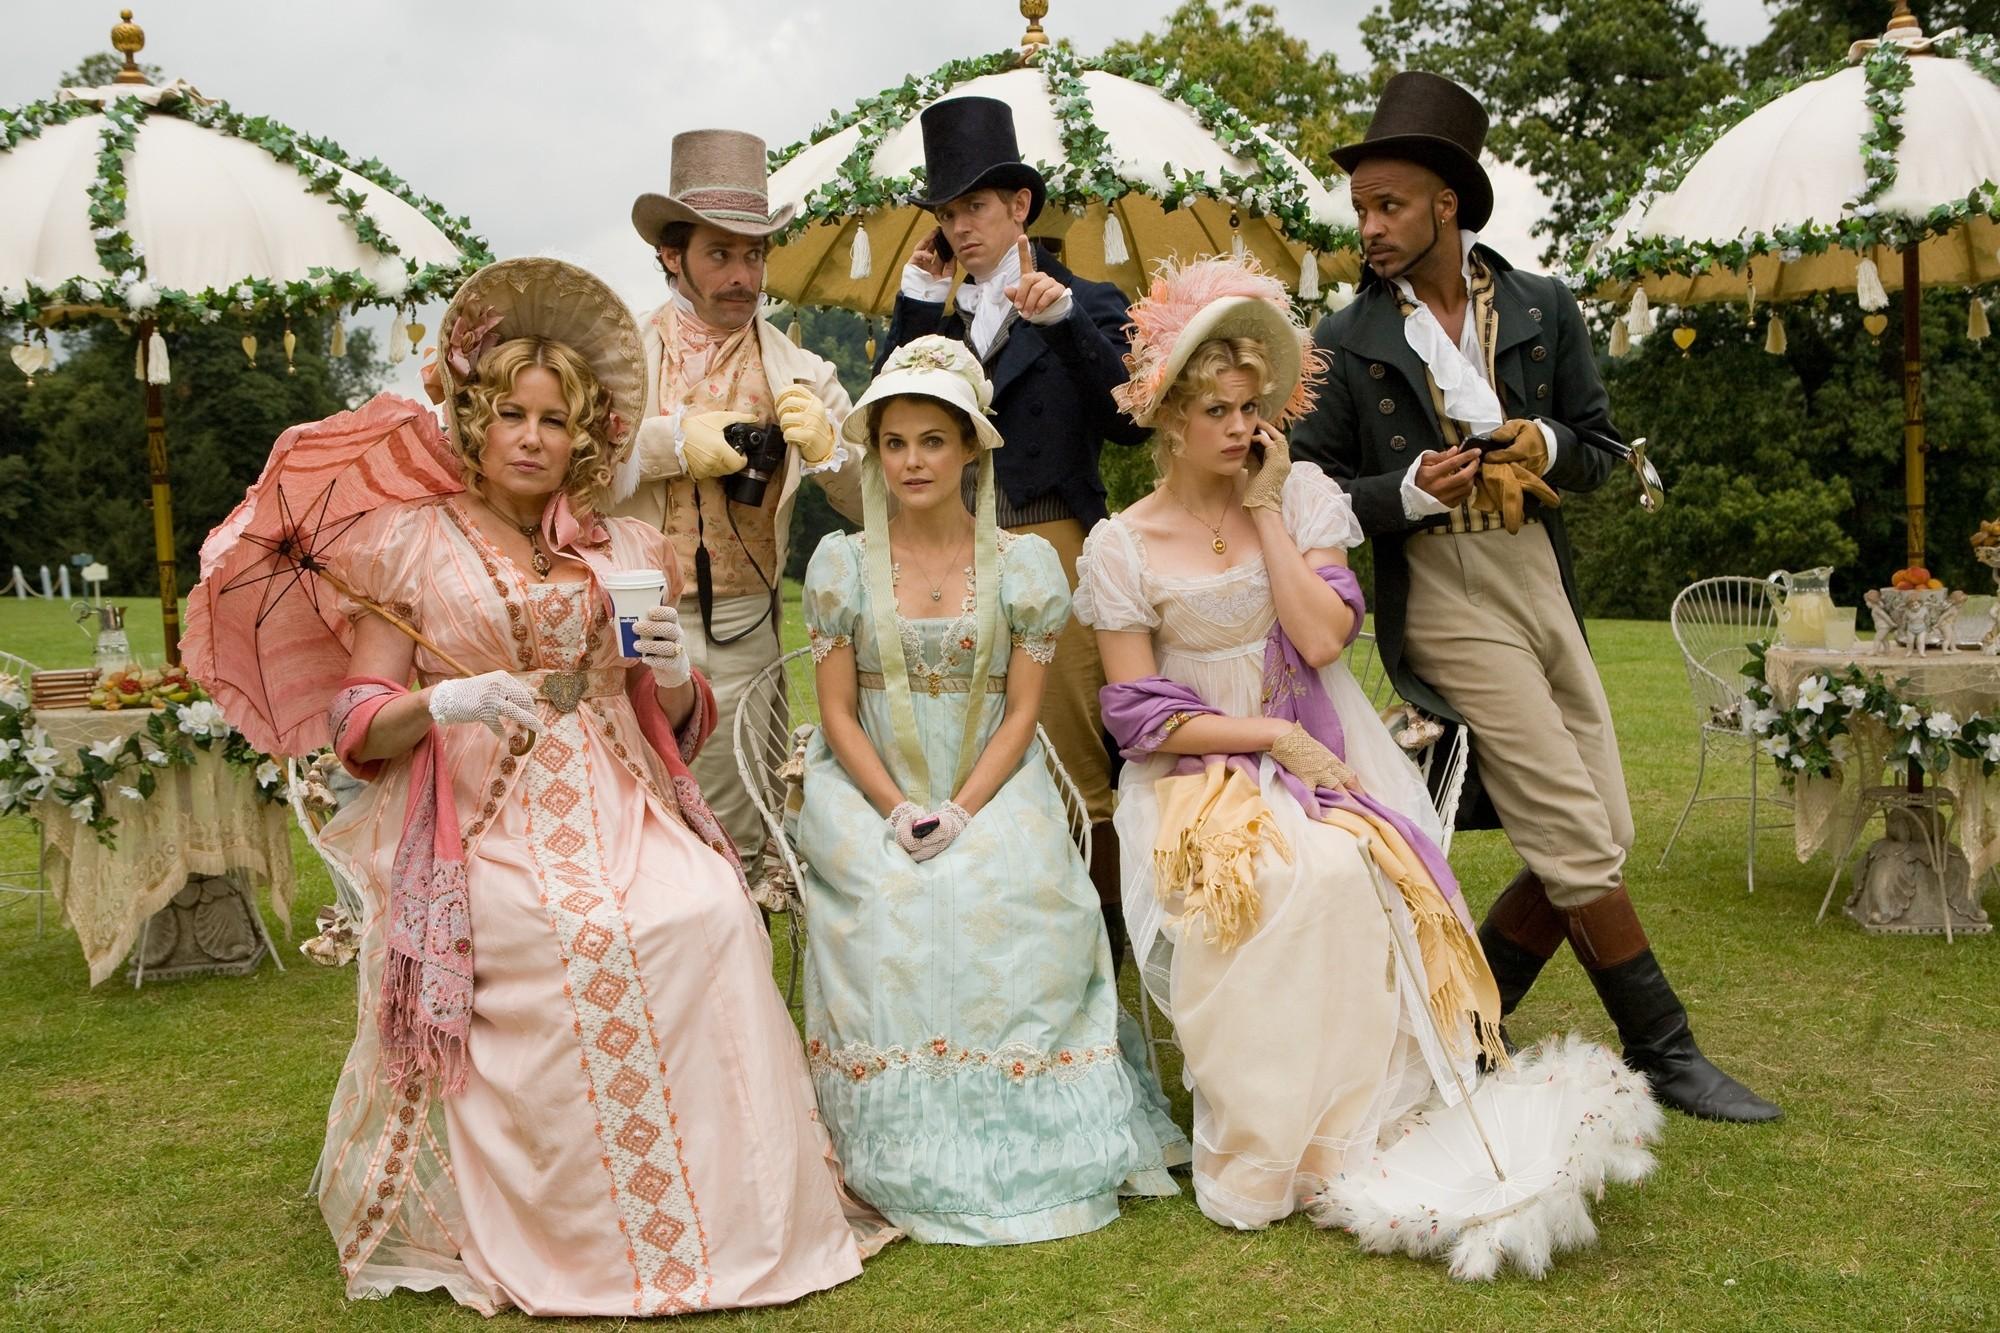 James Callis, JJ Feild, Ricky Whittle, Jennifer Coolidge, Keri Russell and Georgia King in Sony Pictures Classics' Austenland (2013)